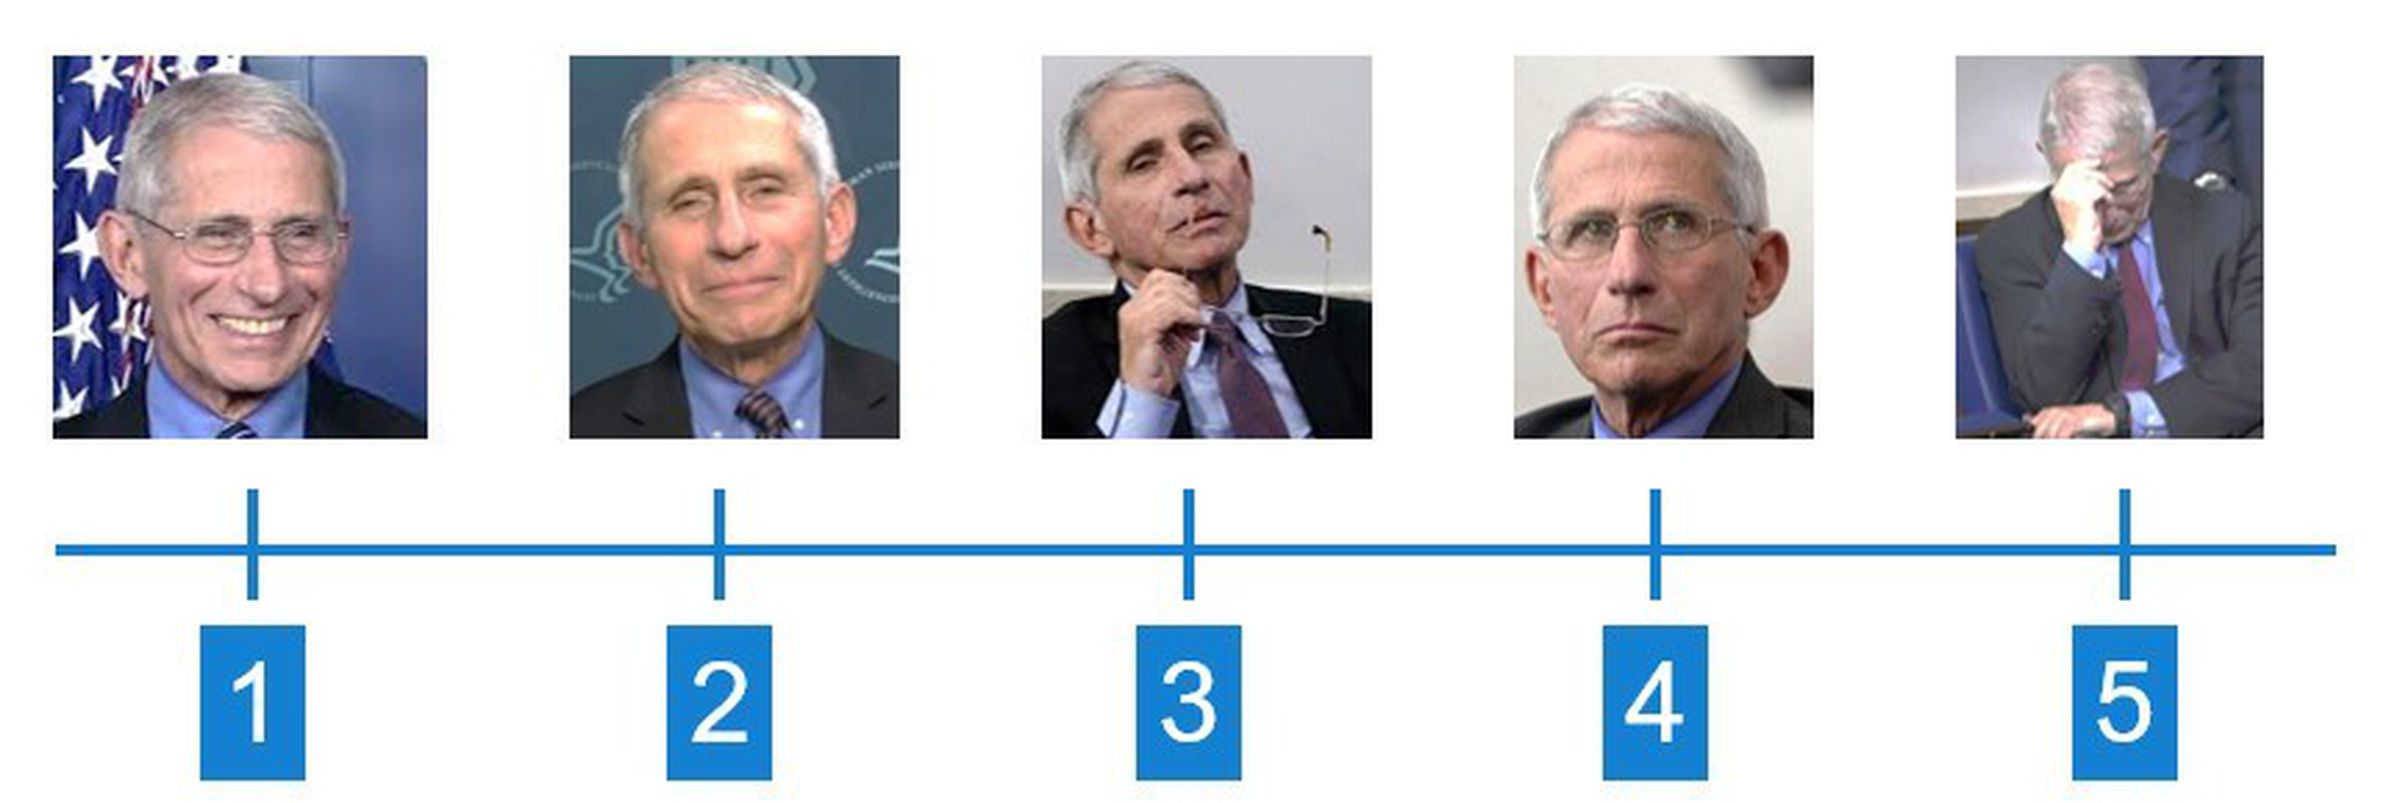 The Fauci meter measures your mood based on the NIAID director’s facial expressions.